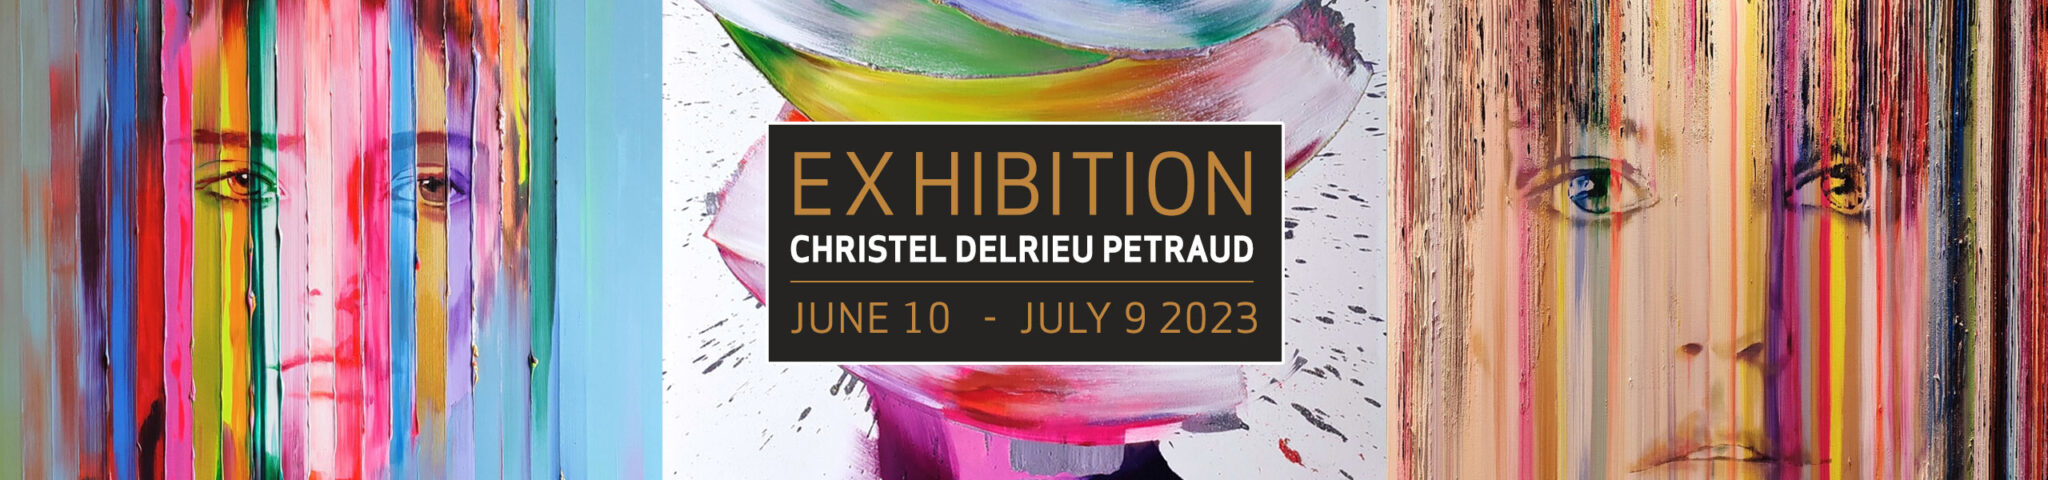 Solo exhibition of christel Delrieu Petraud in vanloon galleries - The netherlands